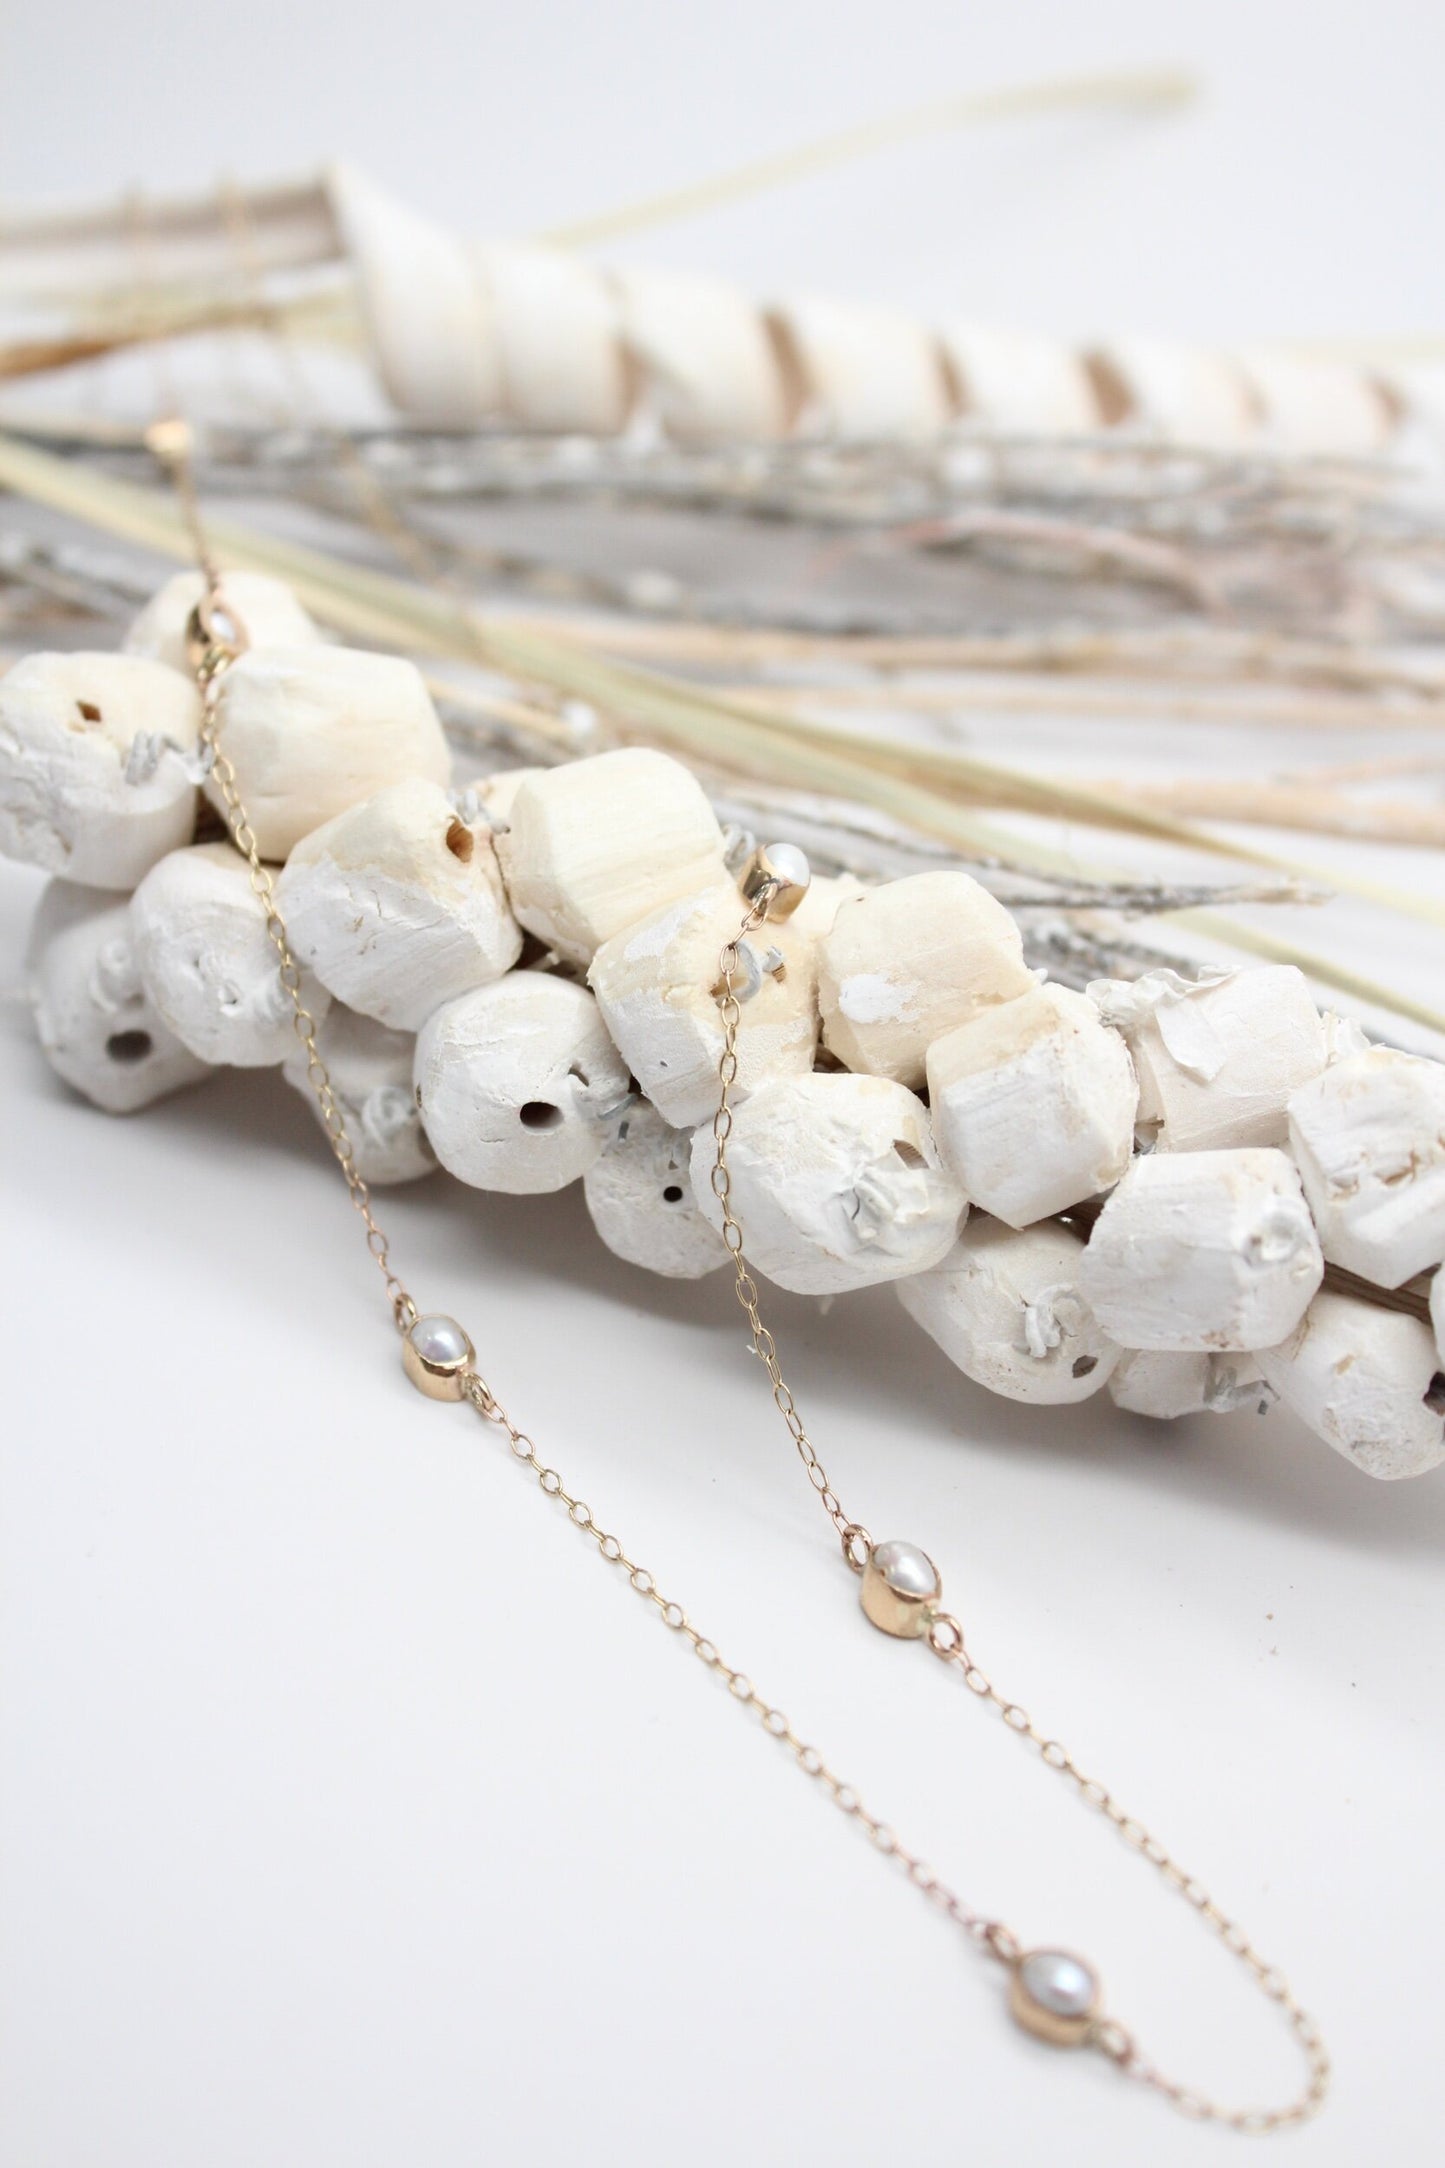 Pearl "Emily" Station Necklace